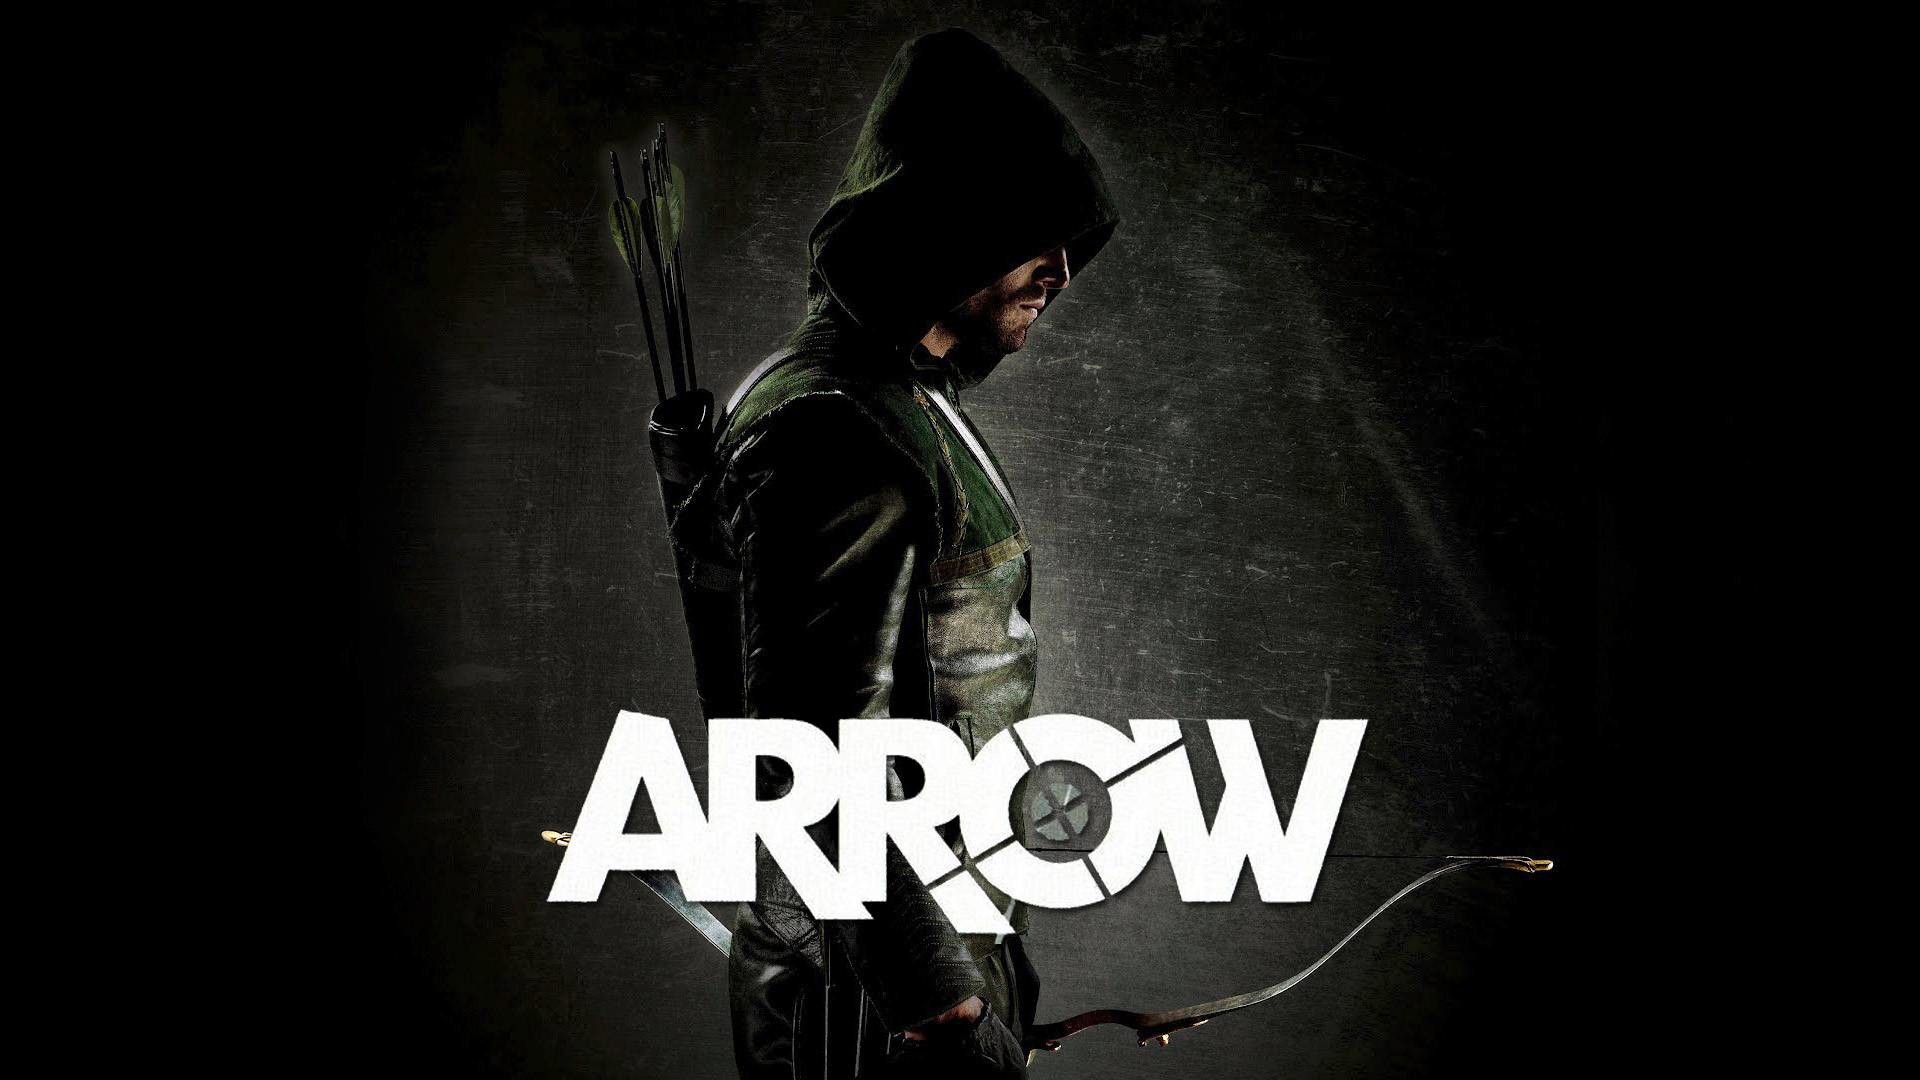 1920x1080 Arrow HD Images whb 9 #ArrowHDImages #Arrow #tvseries #wallpapers